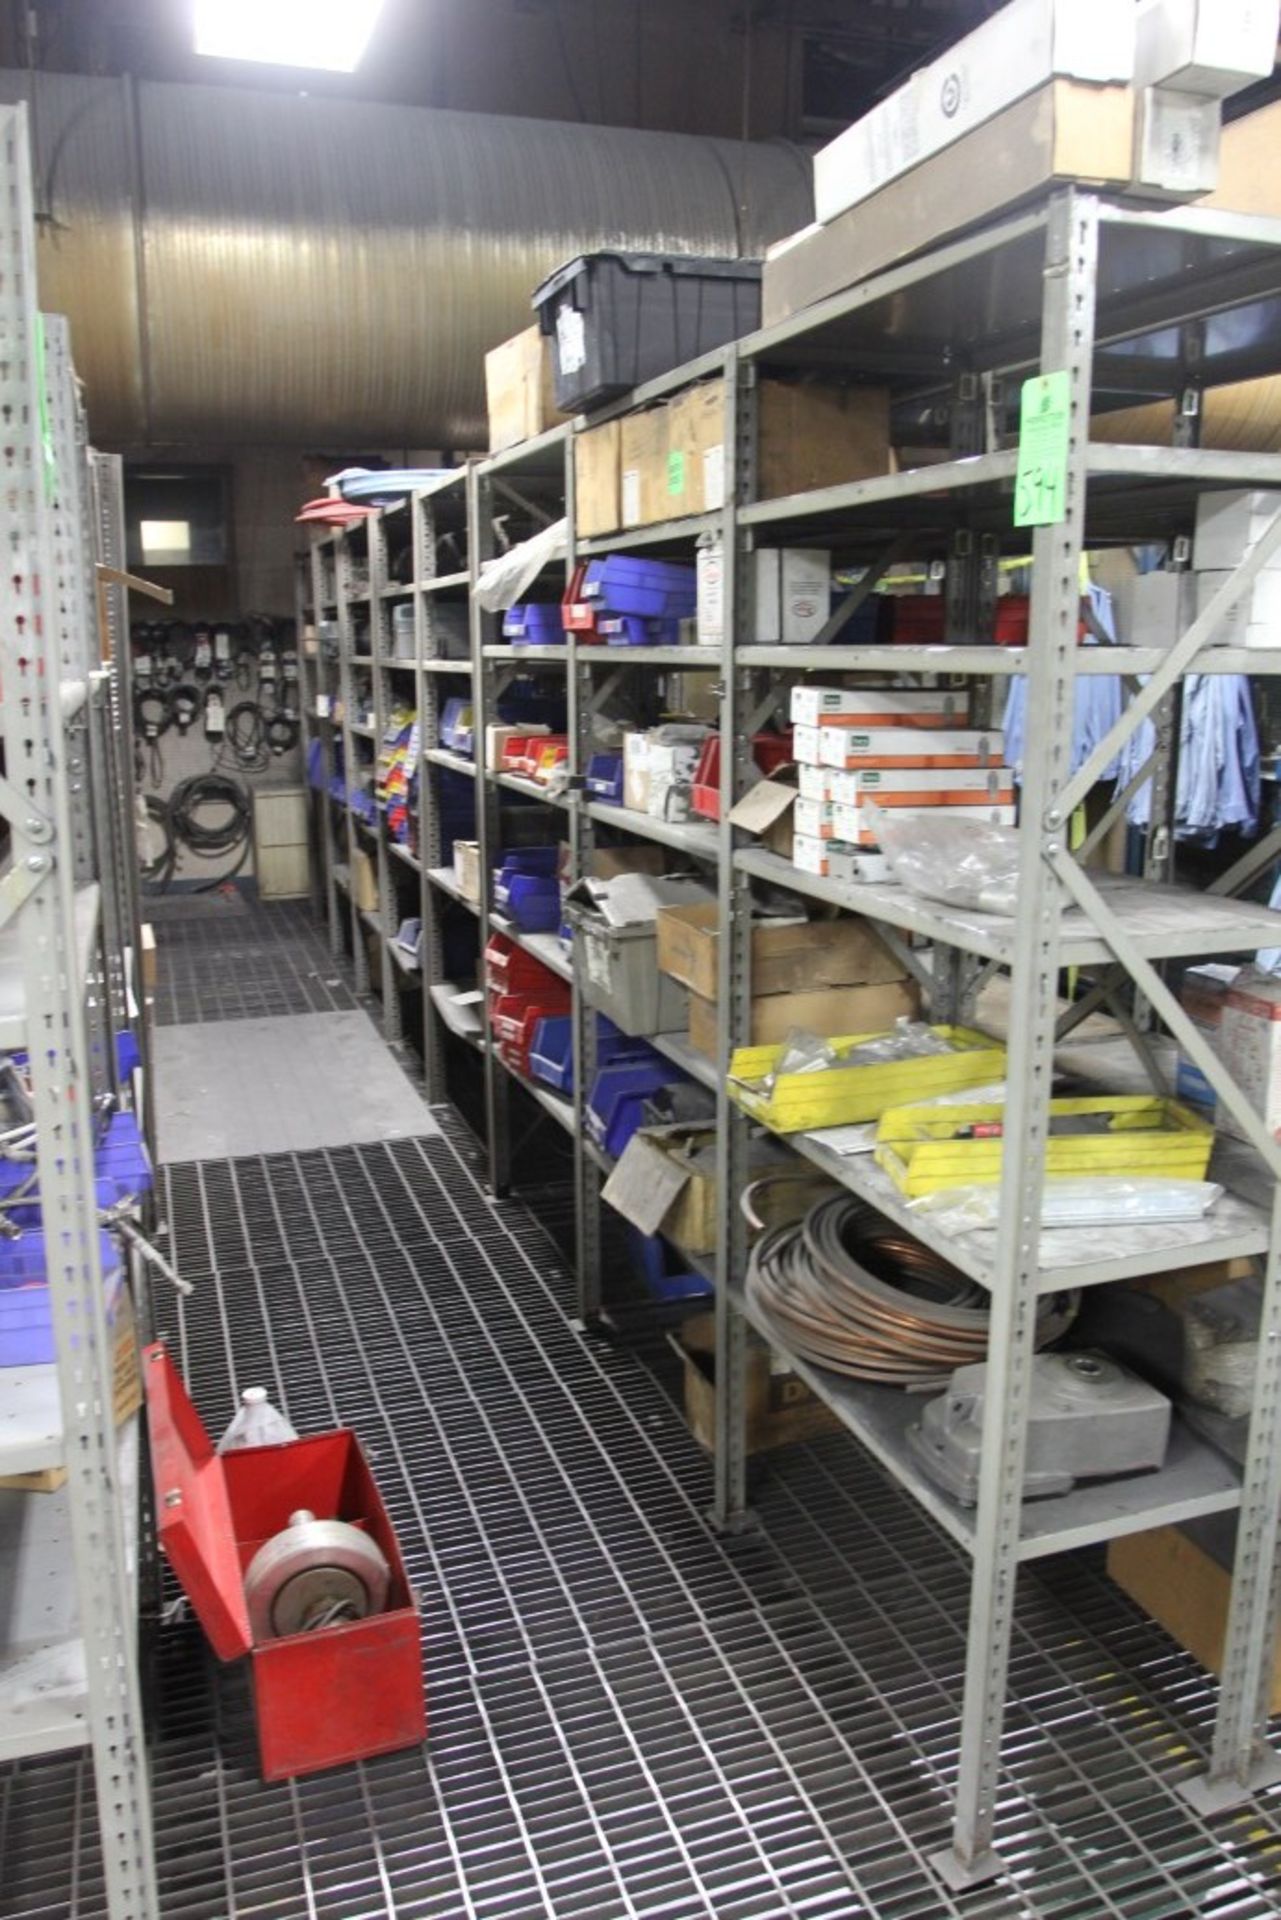 Maintenance Area Comprising (5) Rows of Shelving Units and Contents - Image 8 of 11